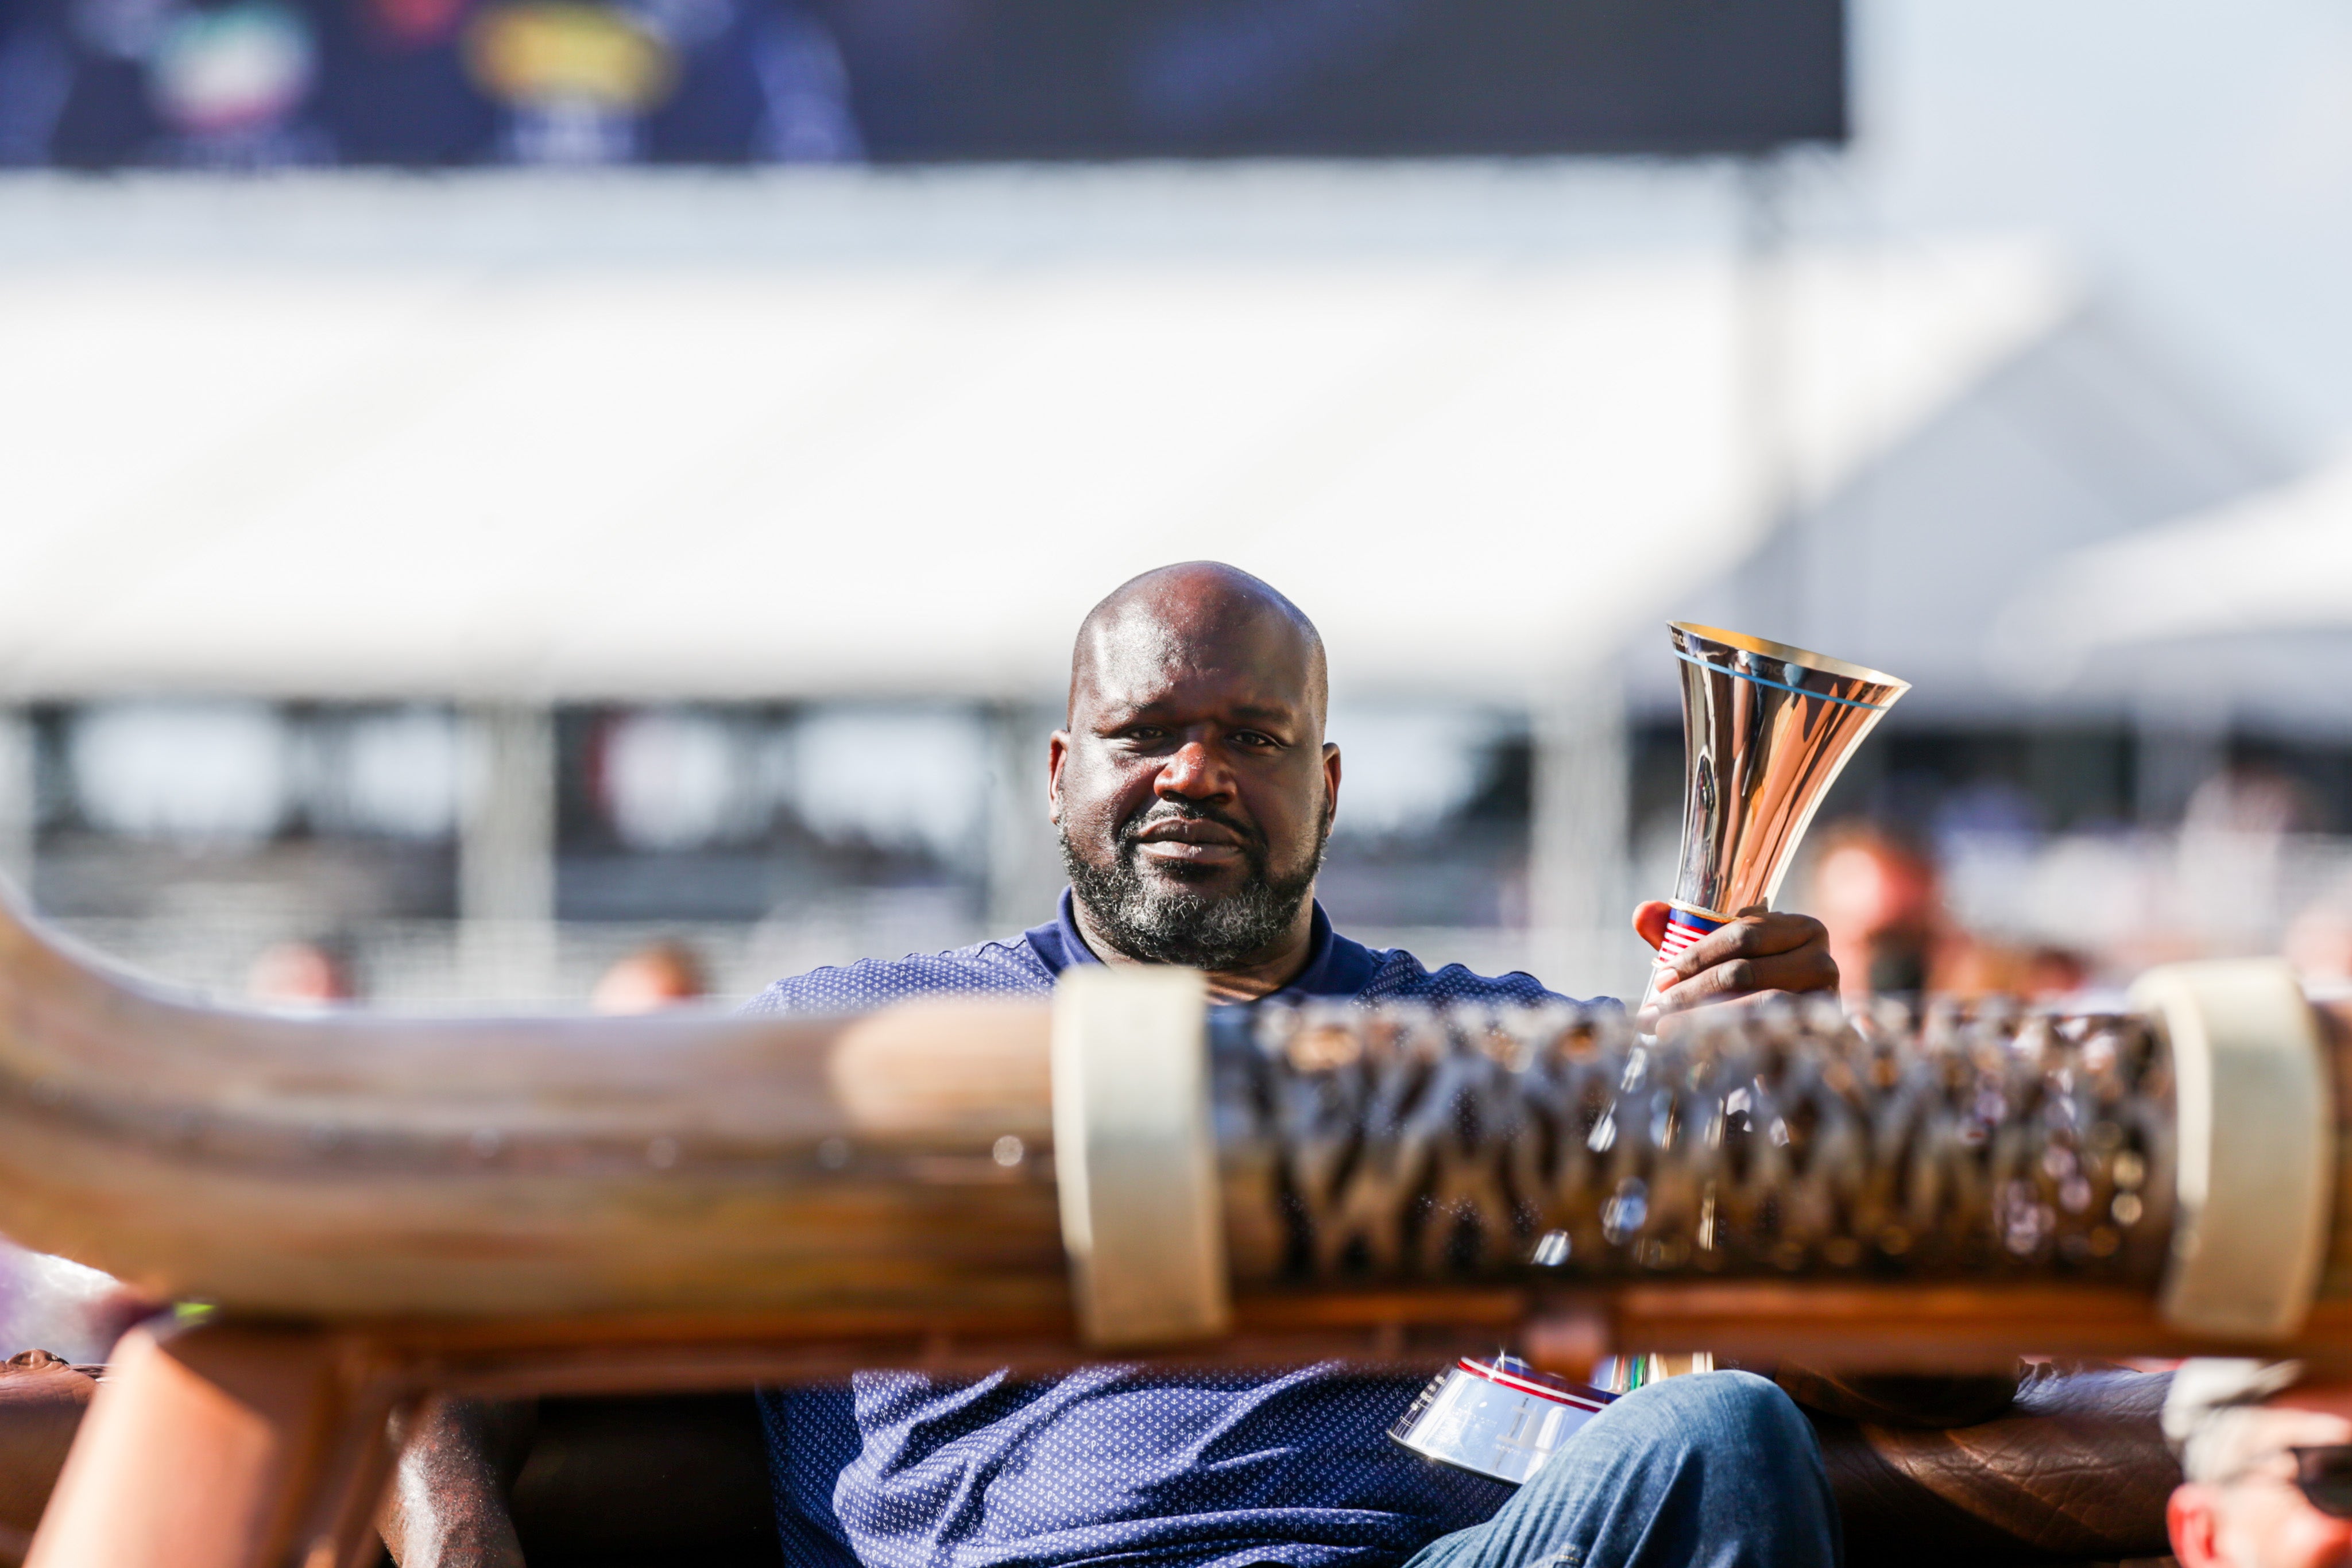 Shaquille O’Neal presents the trophy at the recent US Grand Prix